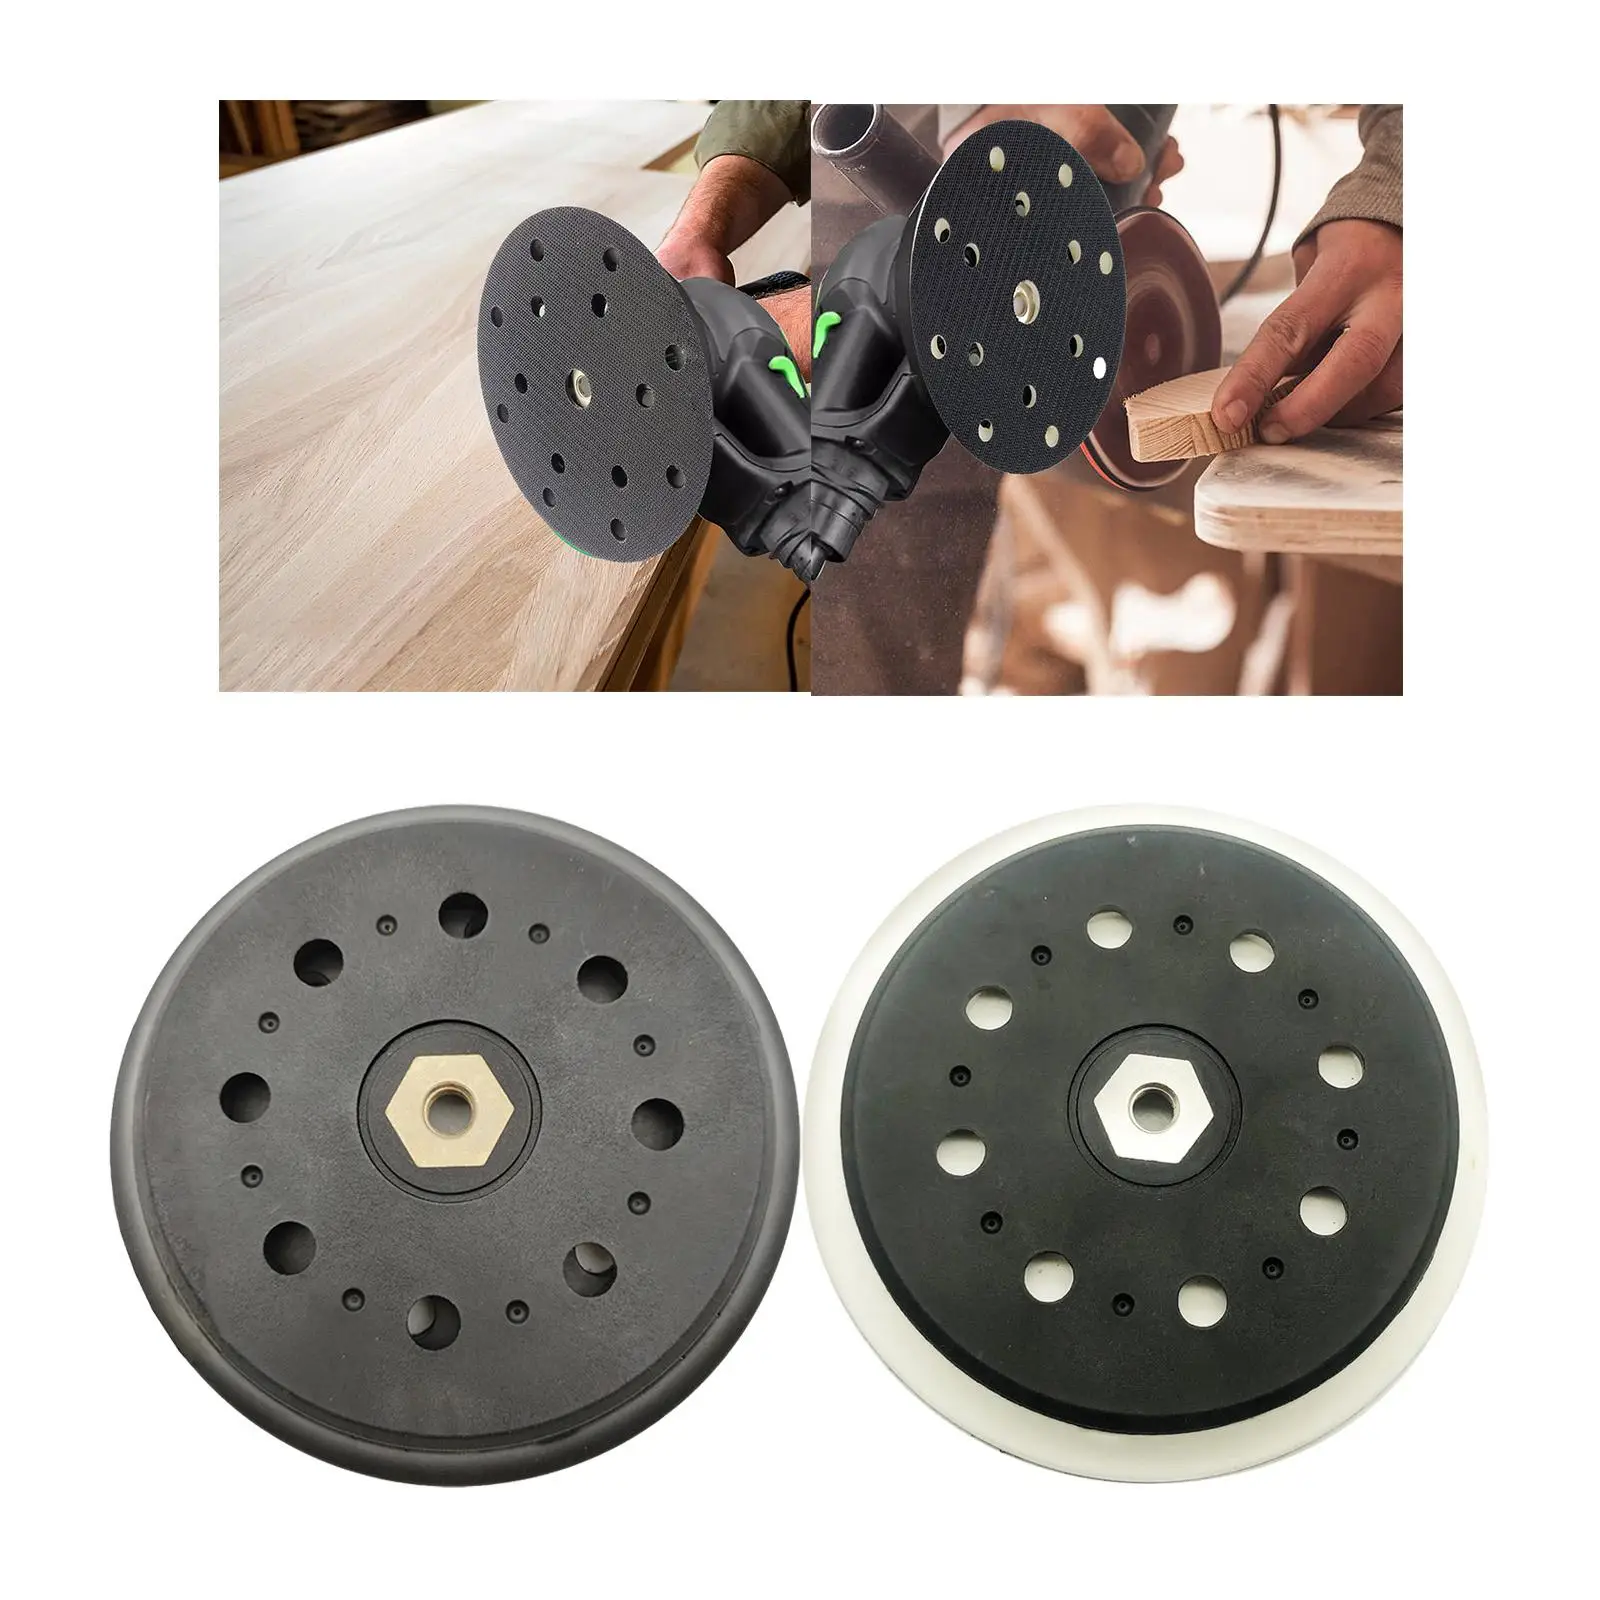 15 Hole Sanding Backing Plate Pad 148mm Sander Polisher Tool for Woodworking